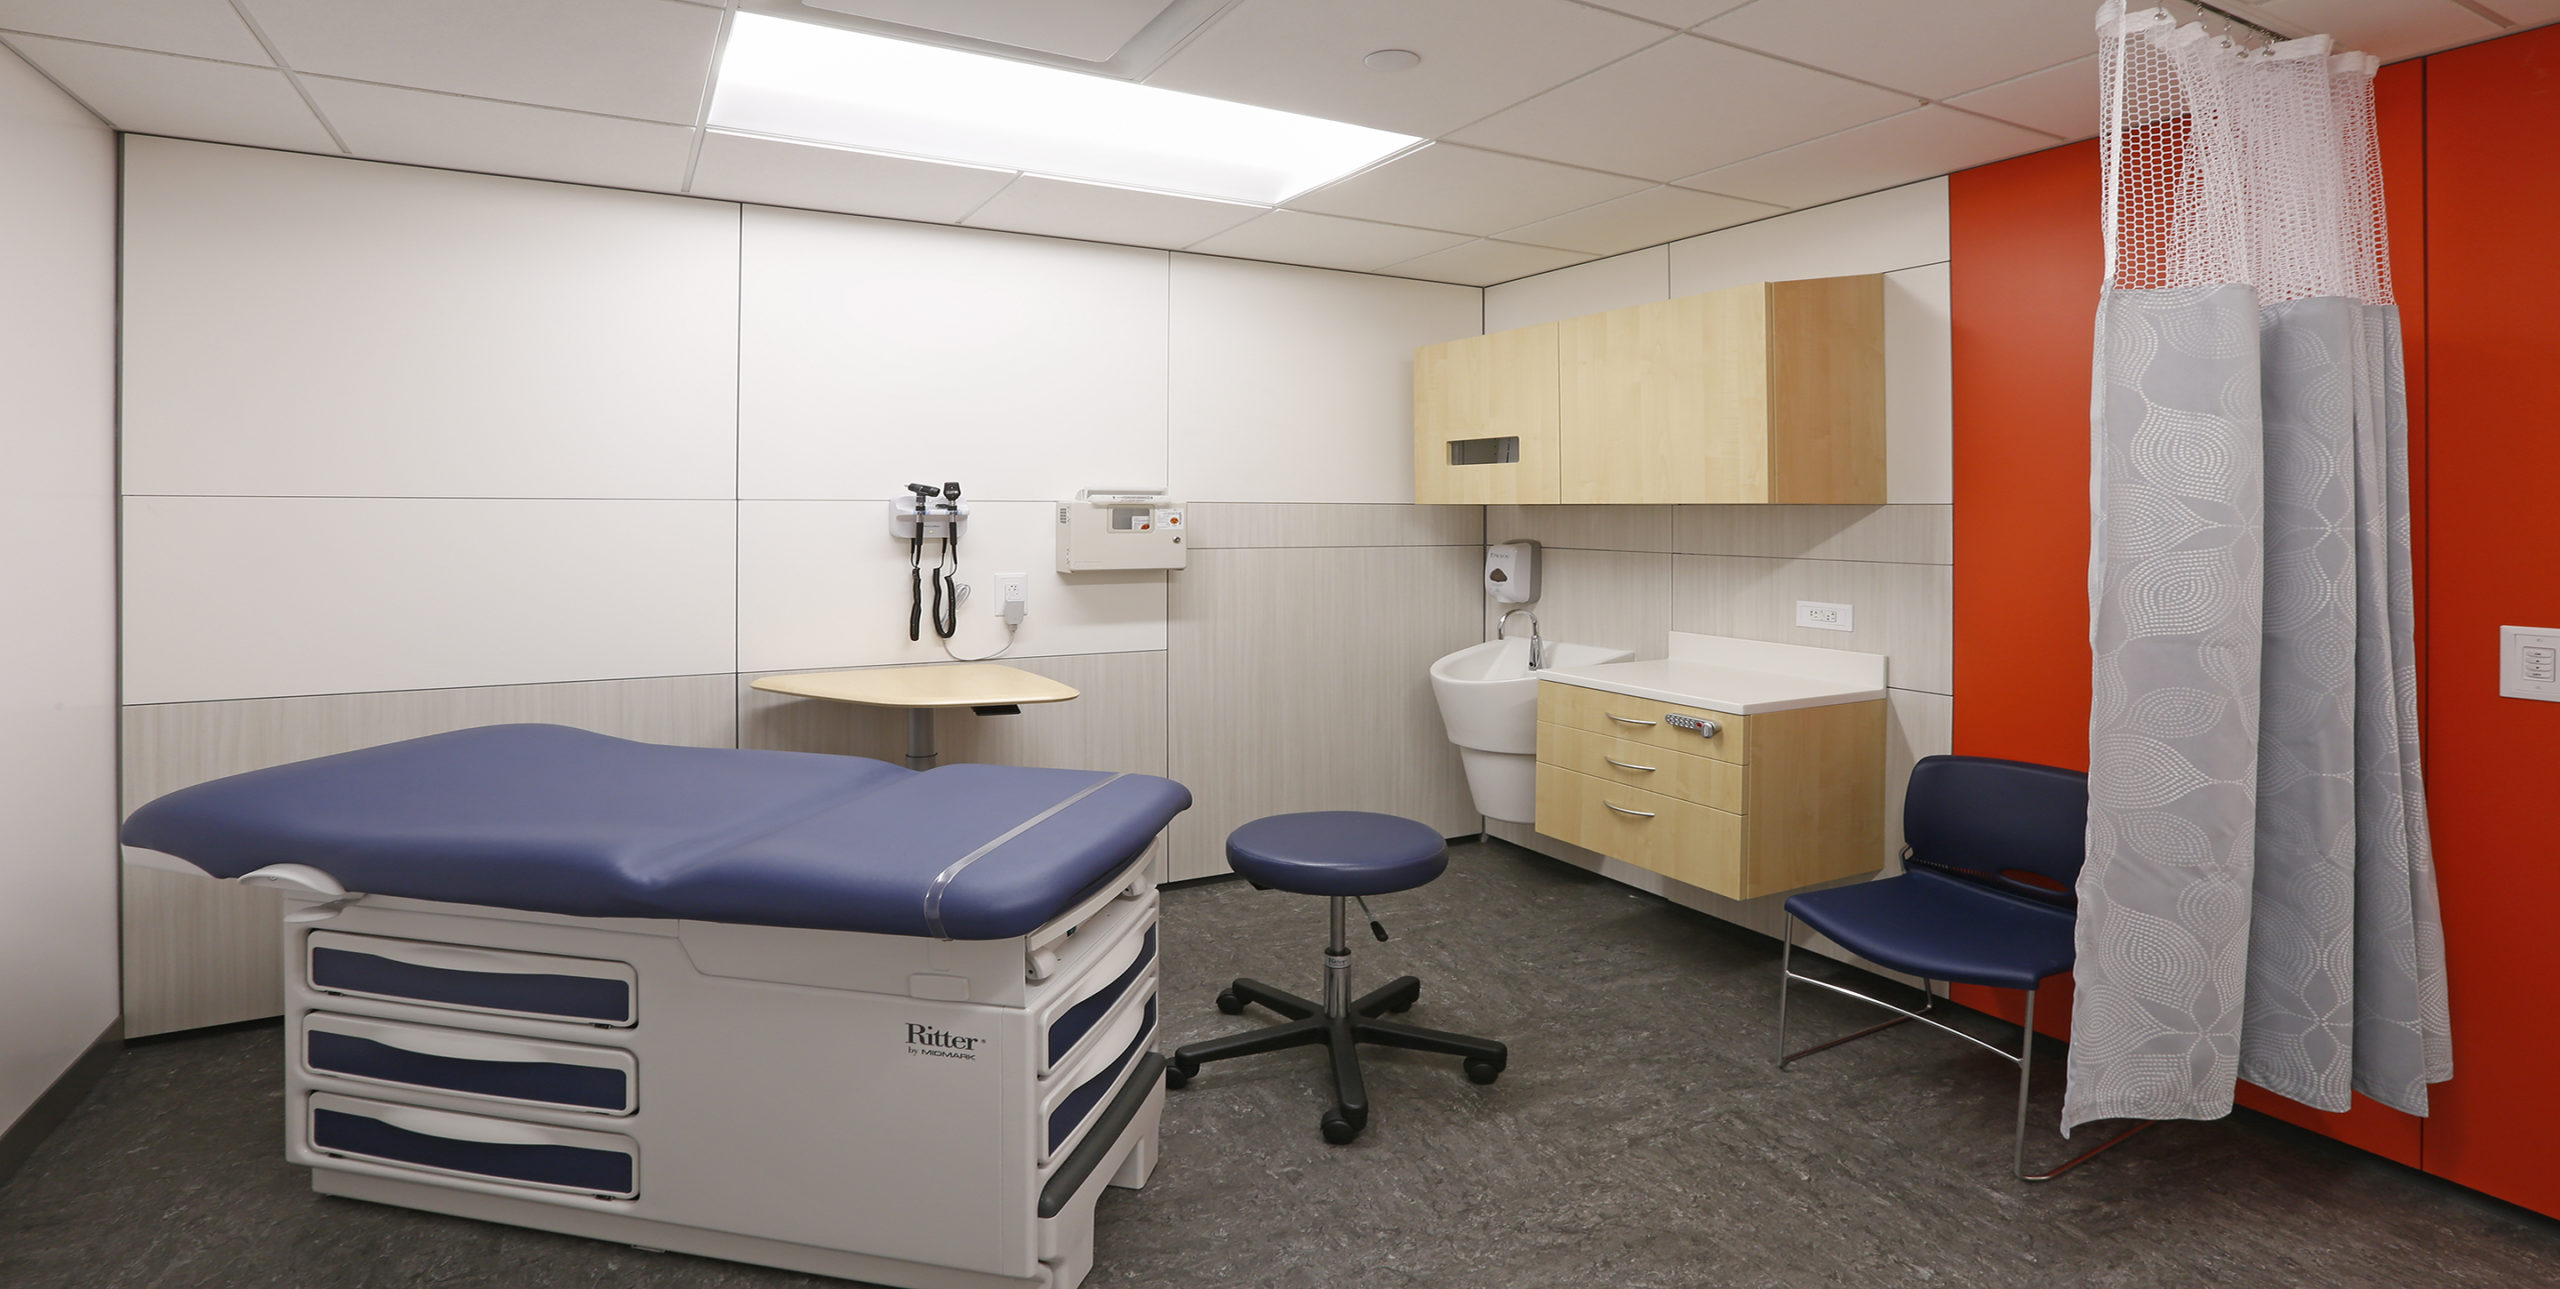 Exam room in Sun River Health Care in Patchogue